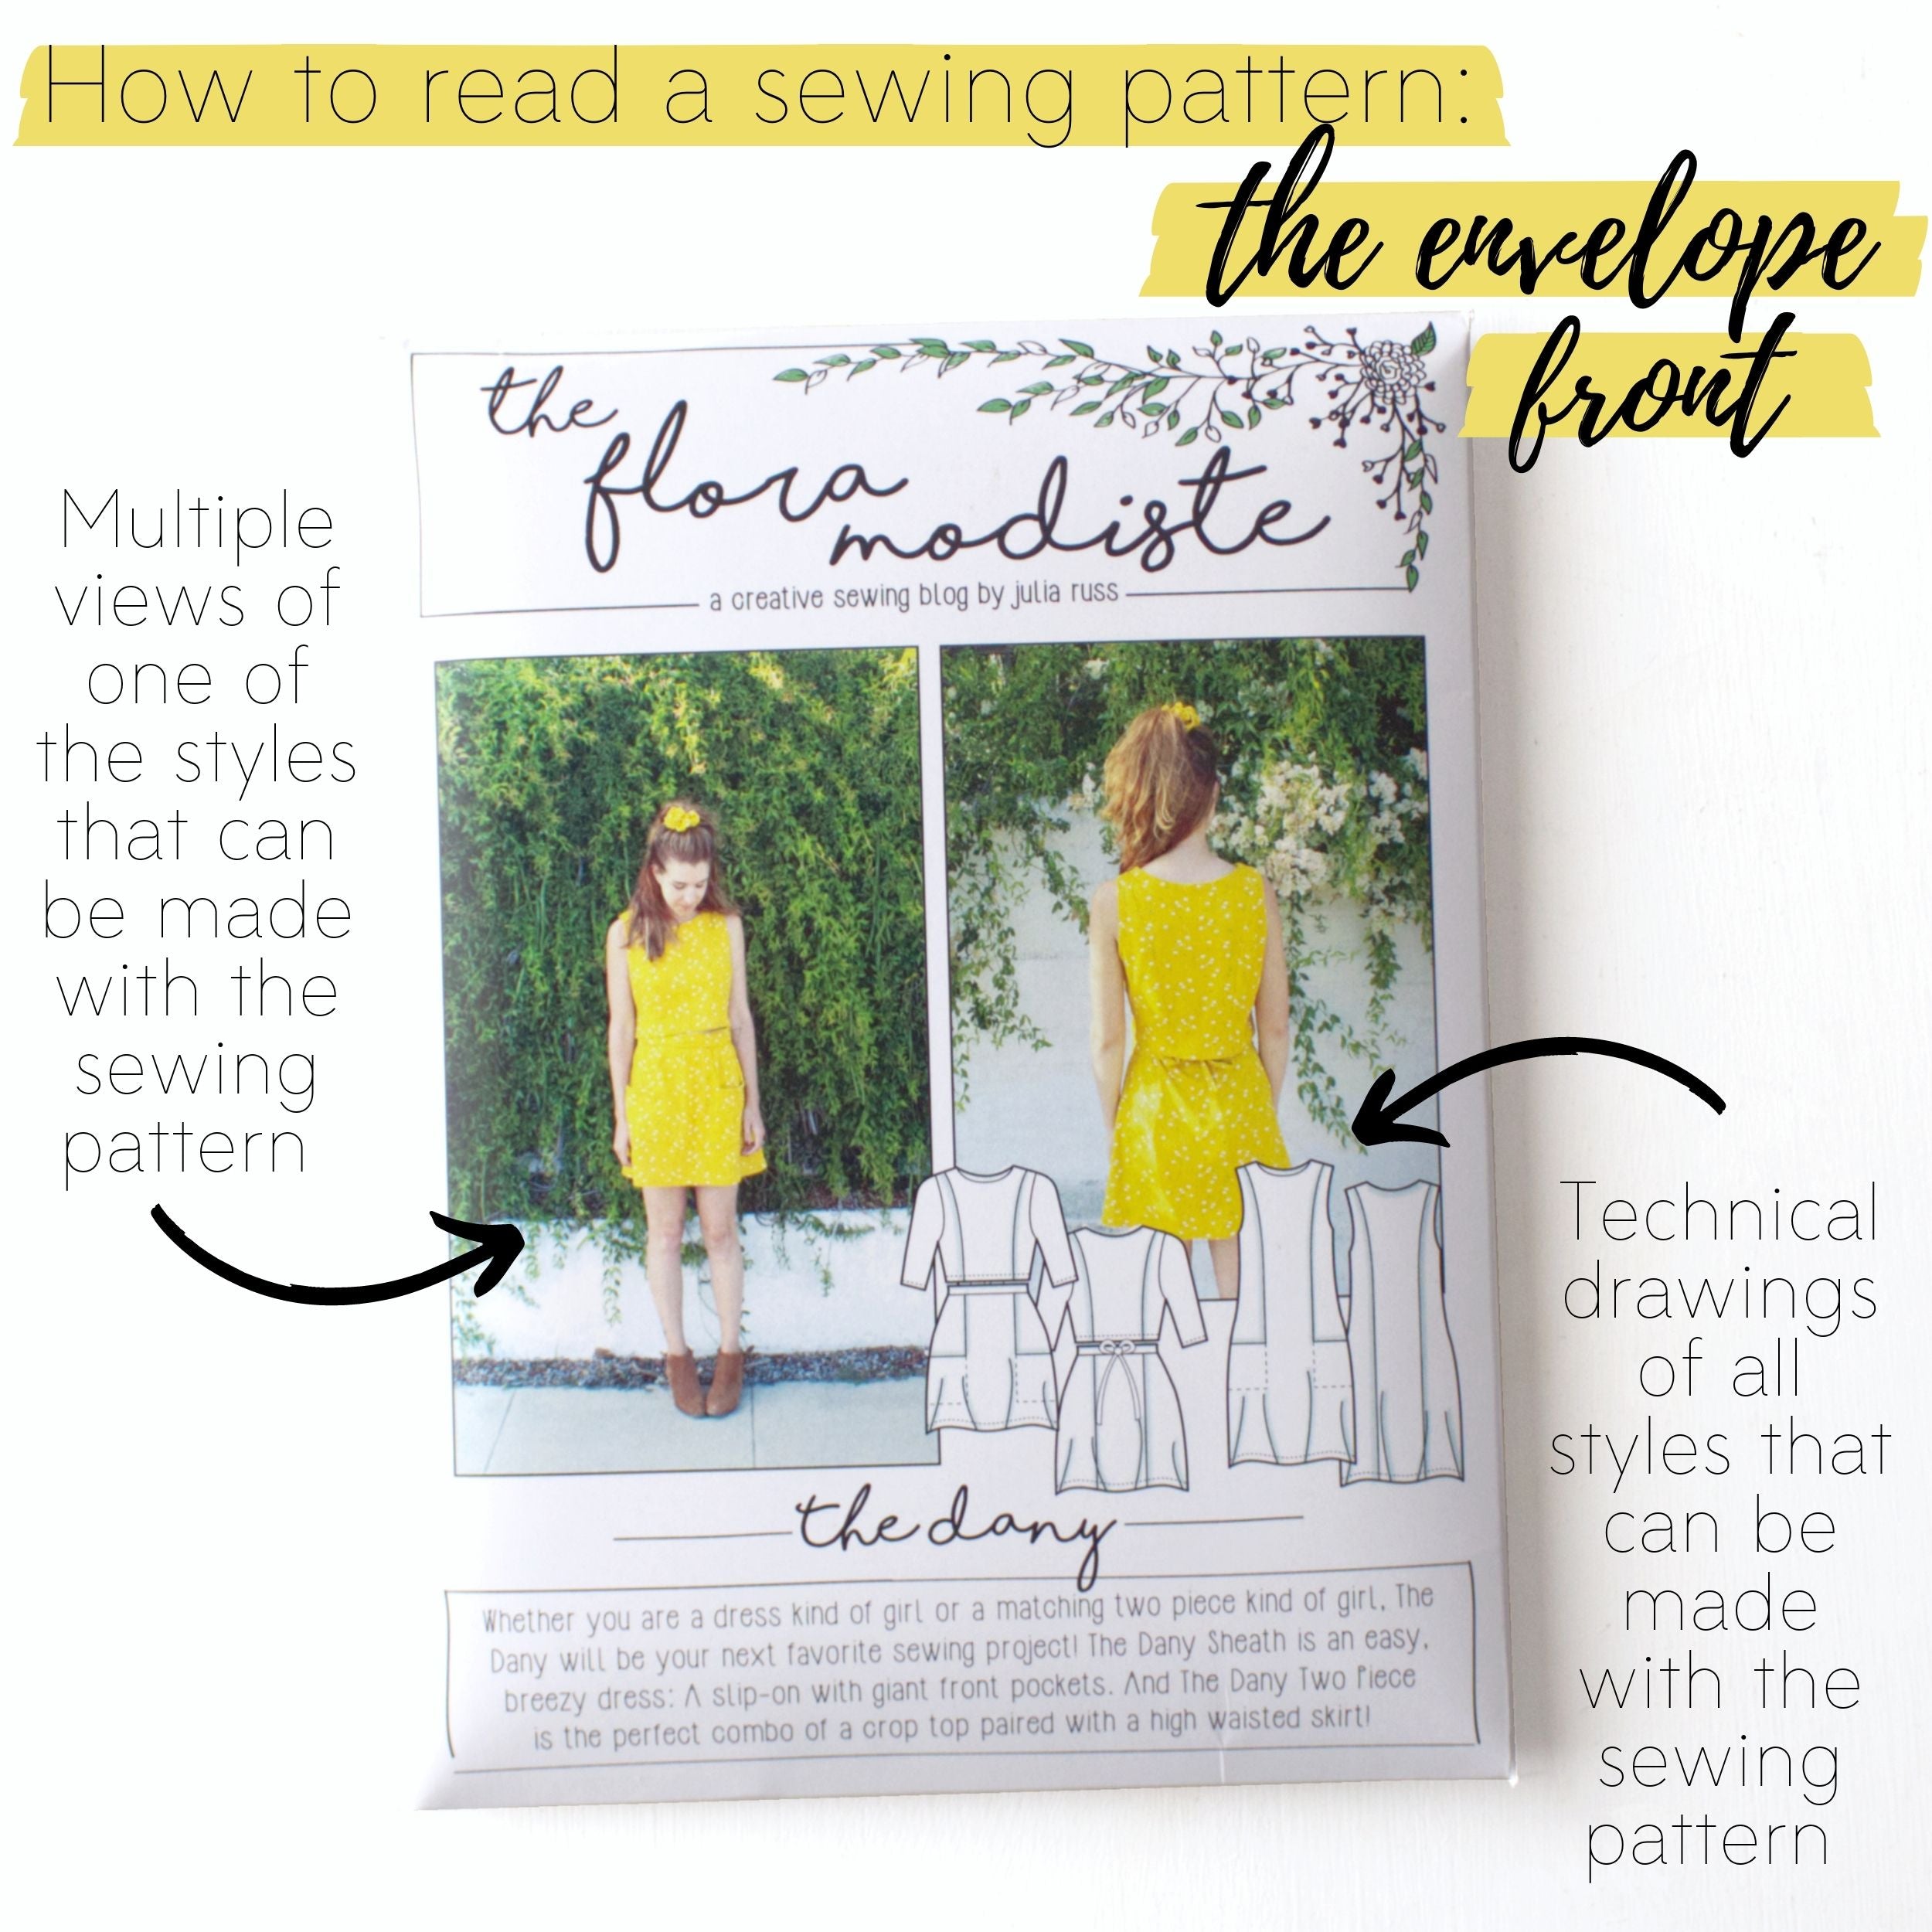 How to read a sewing pattern: The envelope front